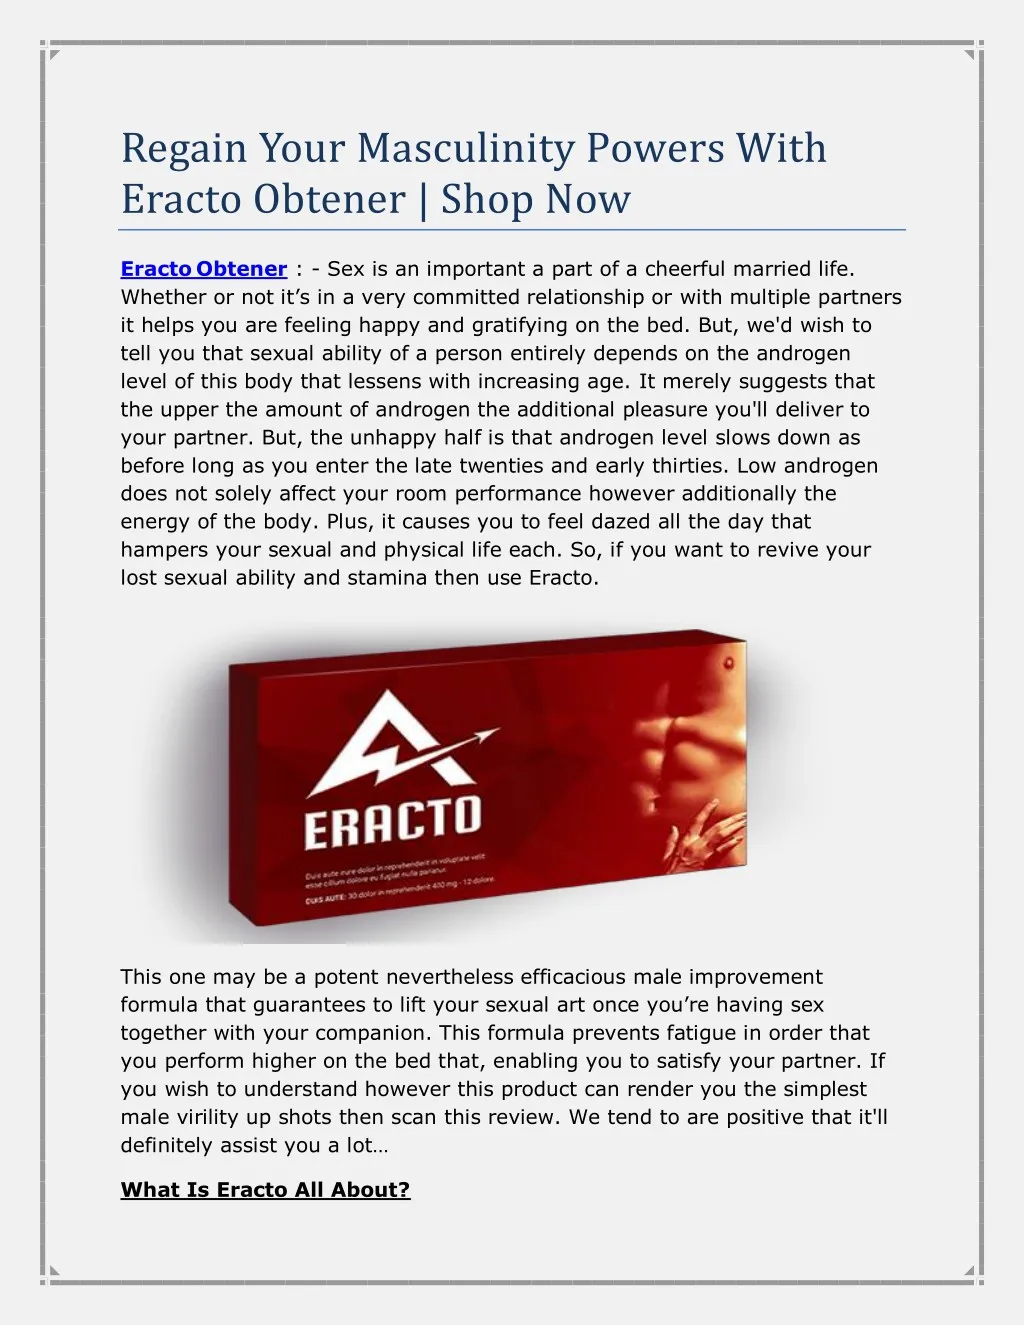 regain your masculinity powers with eracto n.